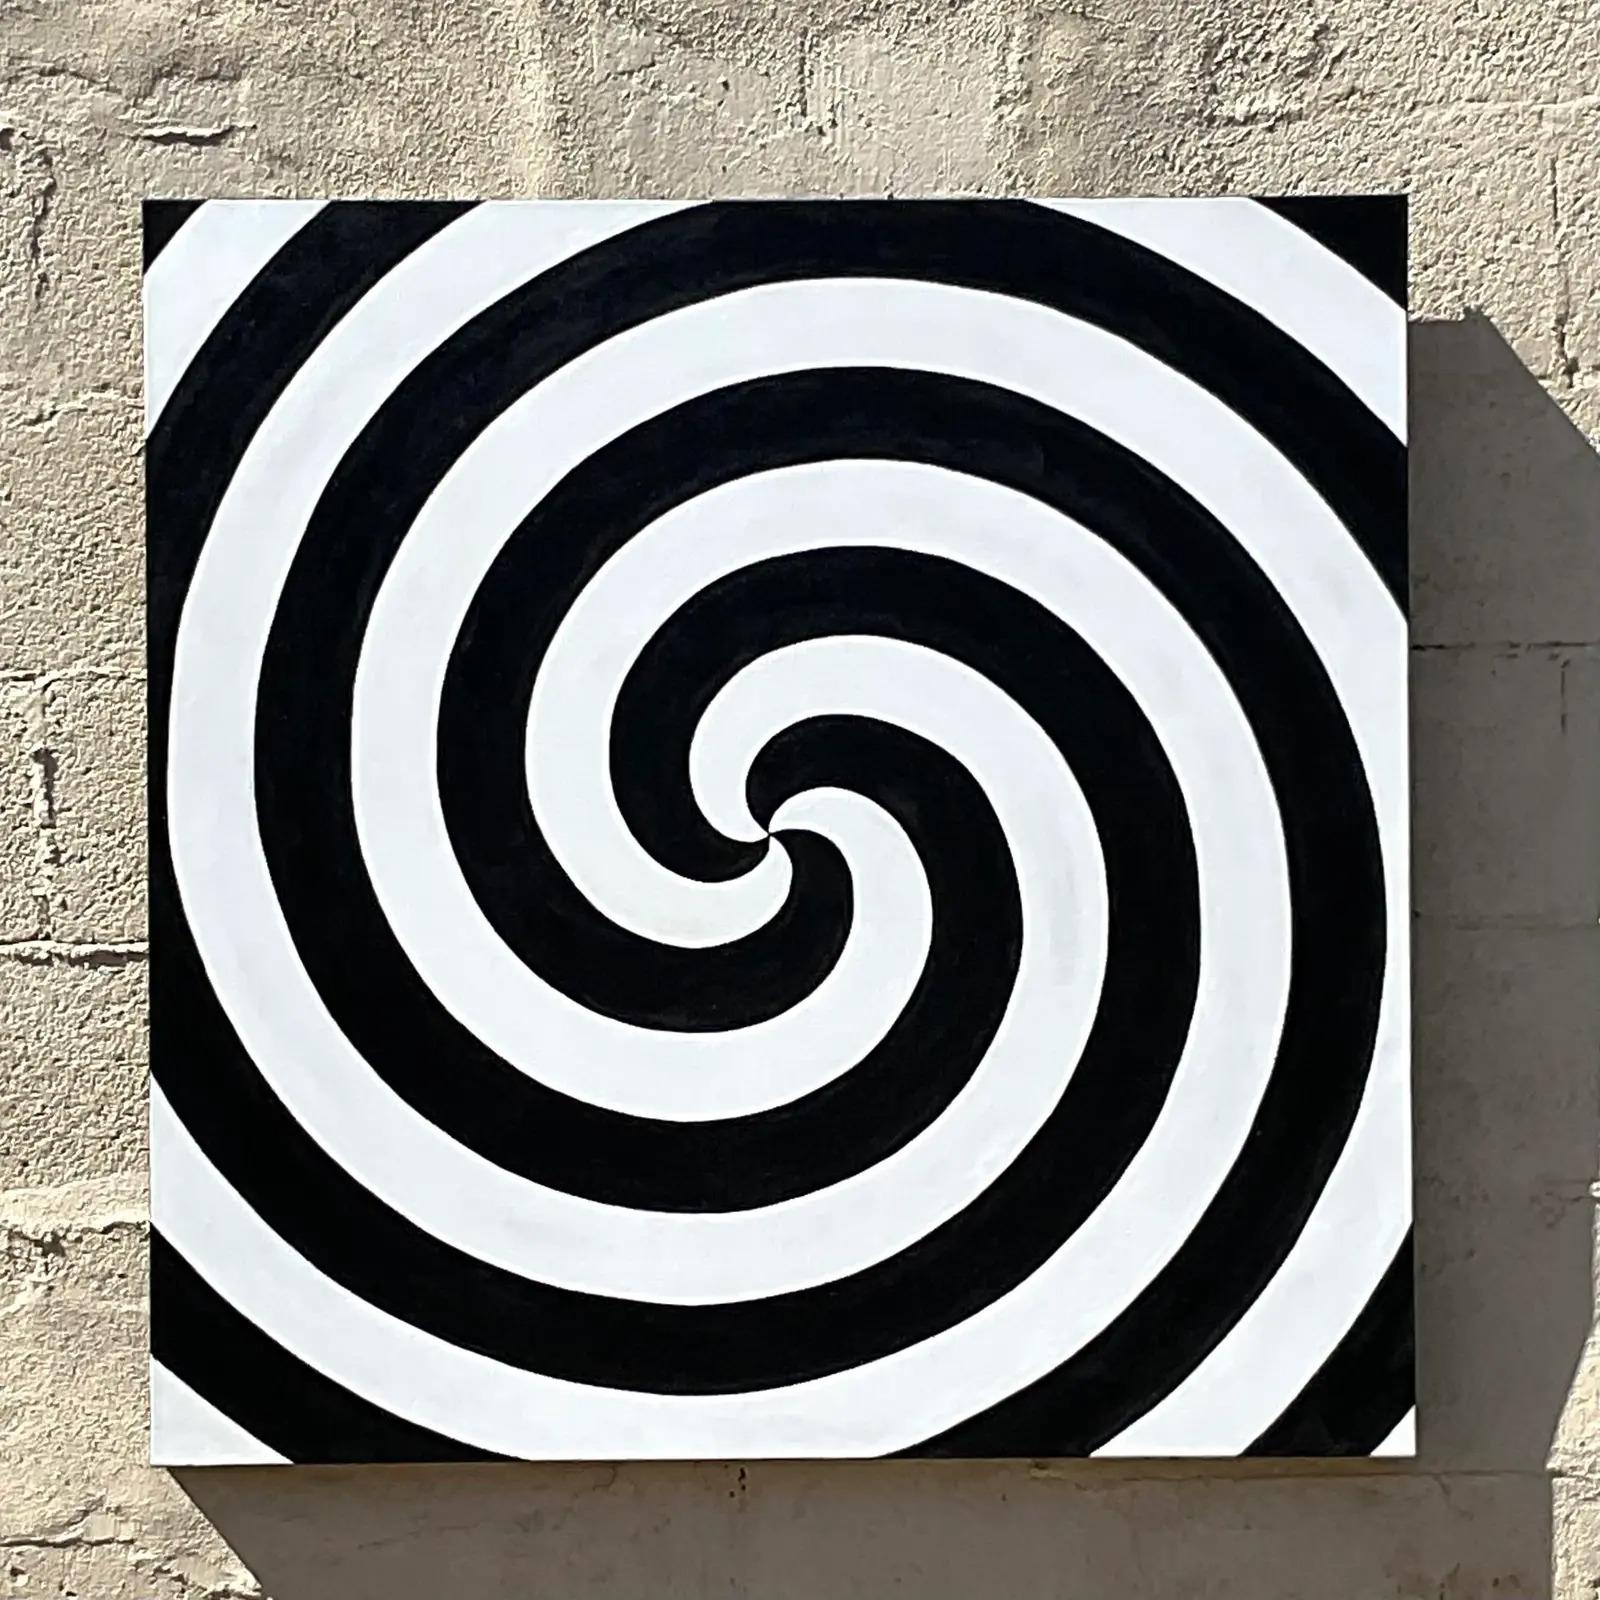 Fabulous vintage Signed 1969 original oil painting. A chic Op Art swirl design in black and white. Signed on the reverse. Acquired from a Palm Beach estate.